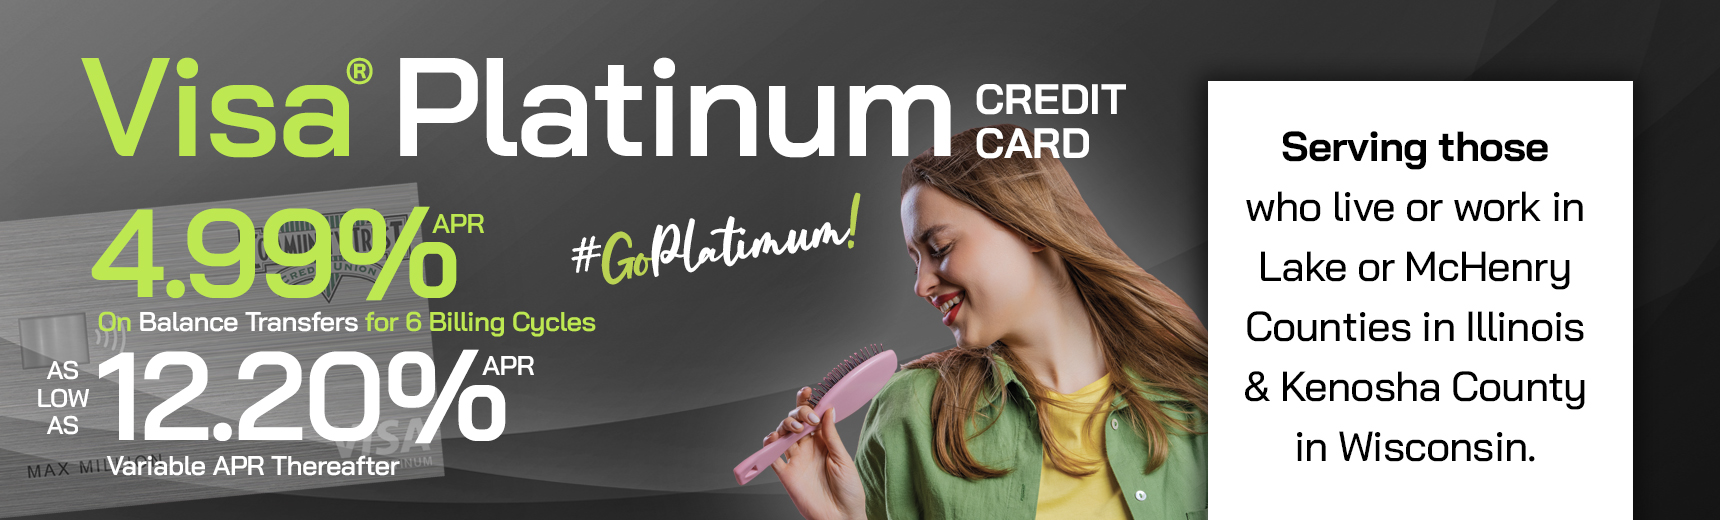 CTCU Visa Platinum 4.99% apr on balance transfers for 6 billing cycles as low as 12.20% apr variable apr thereafter no transfer fee